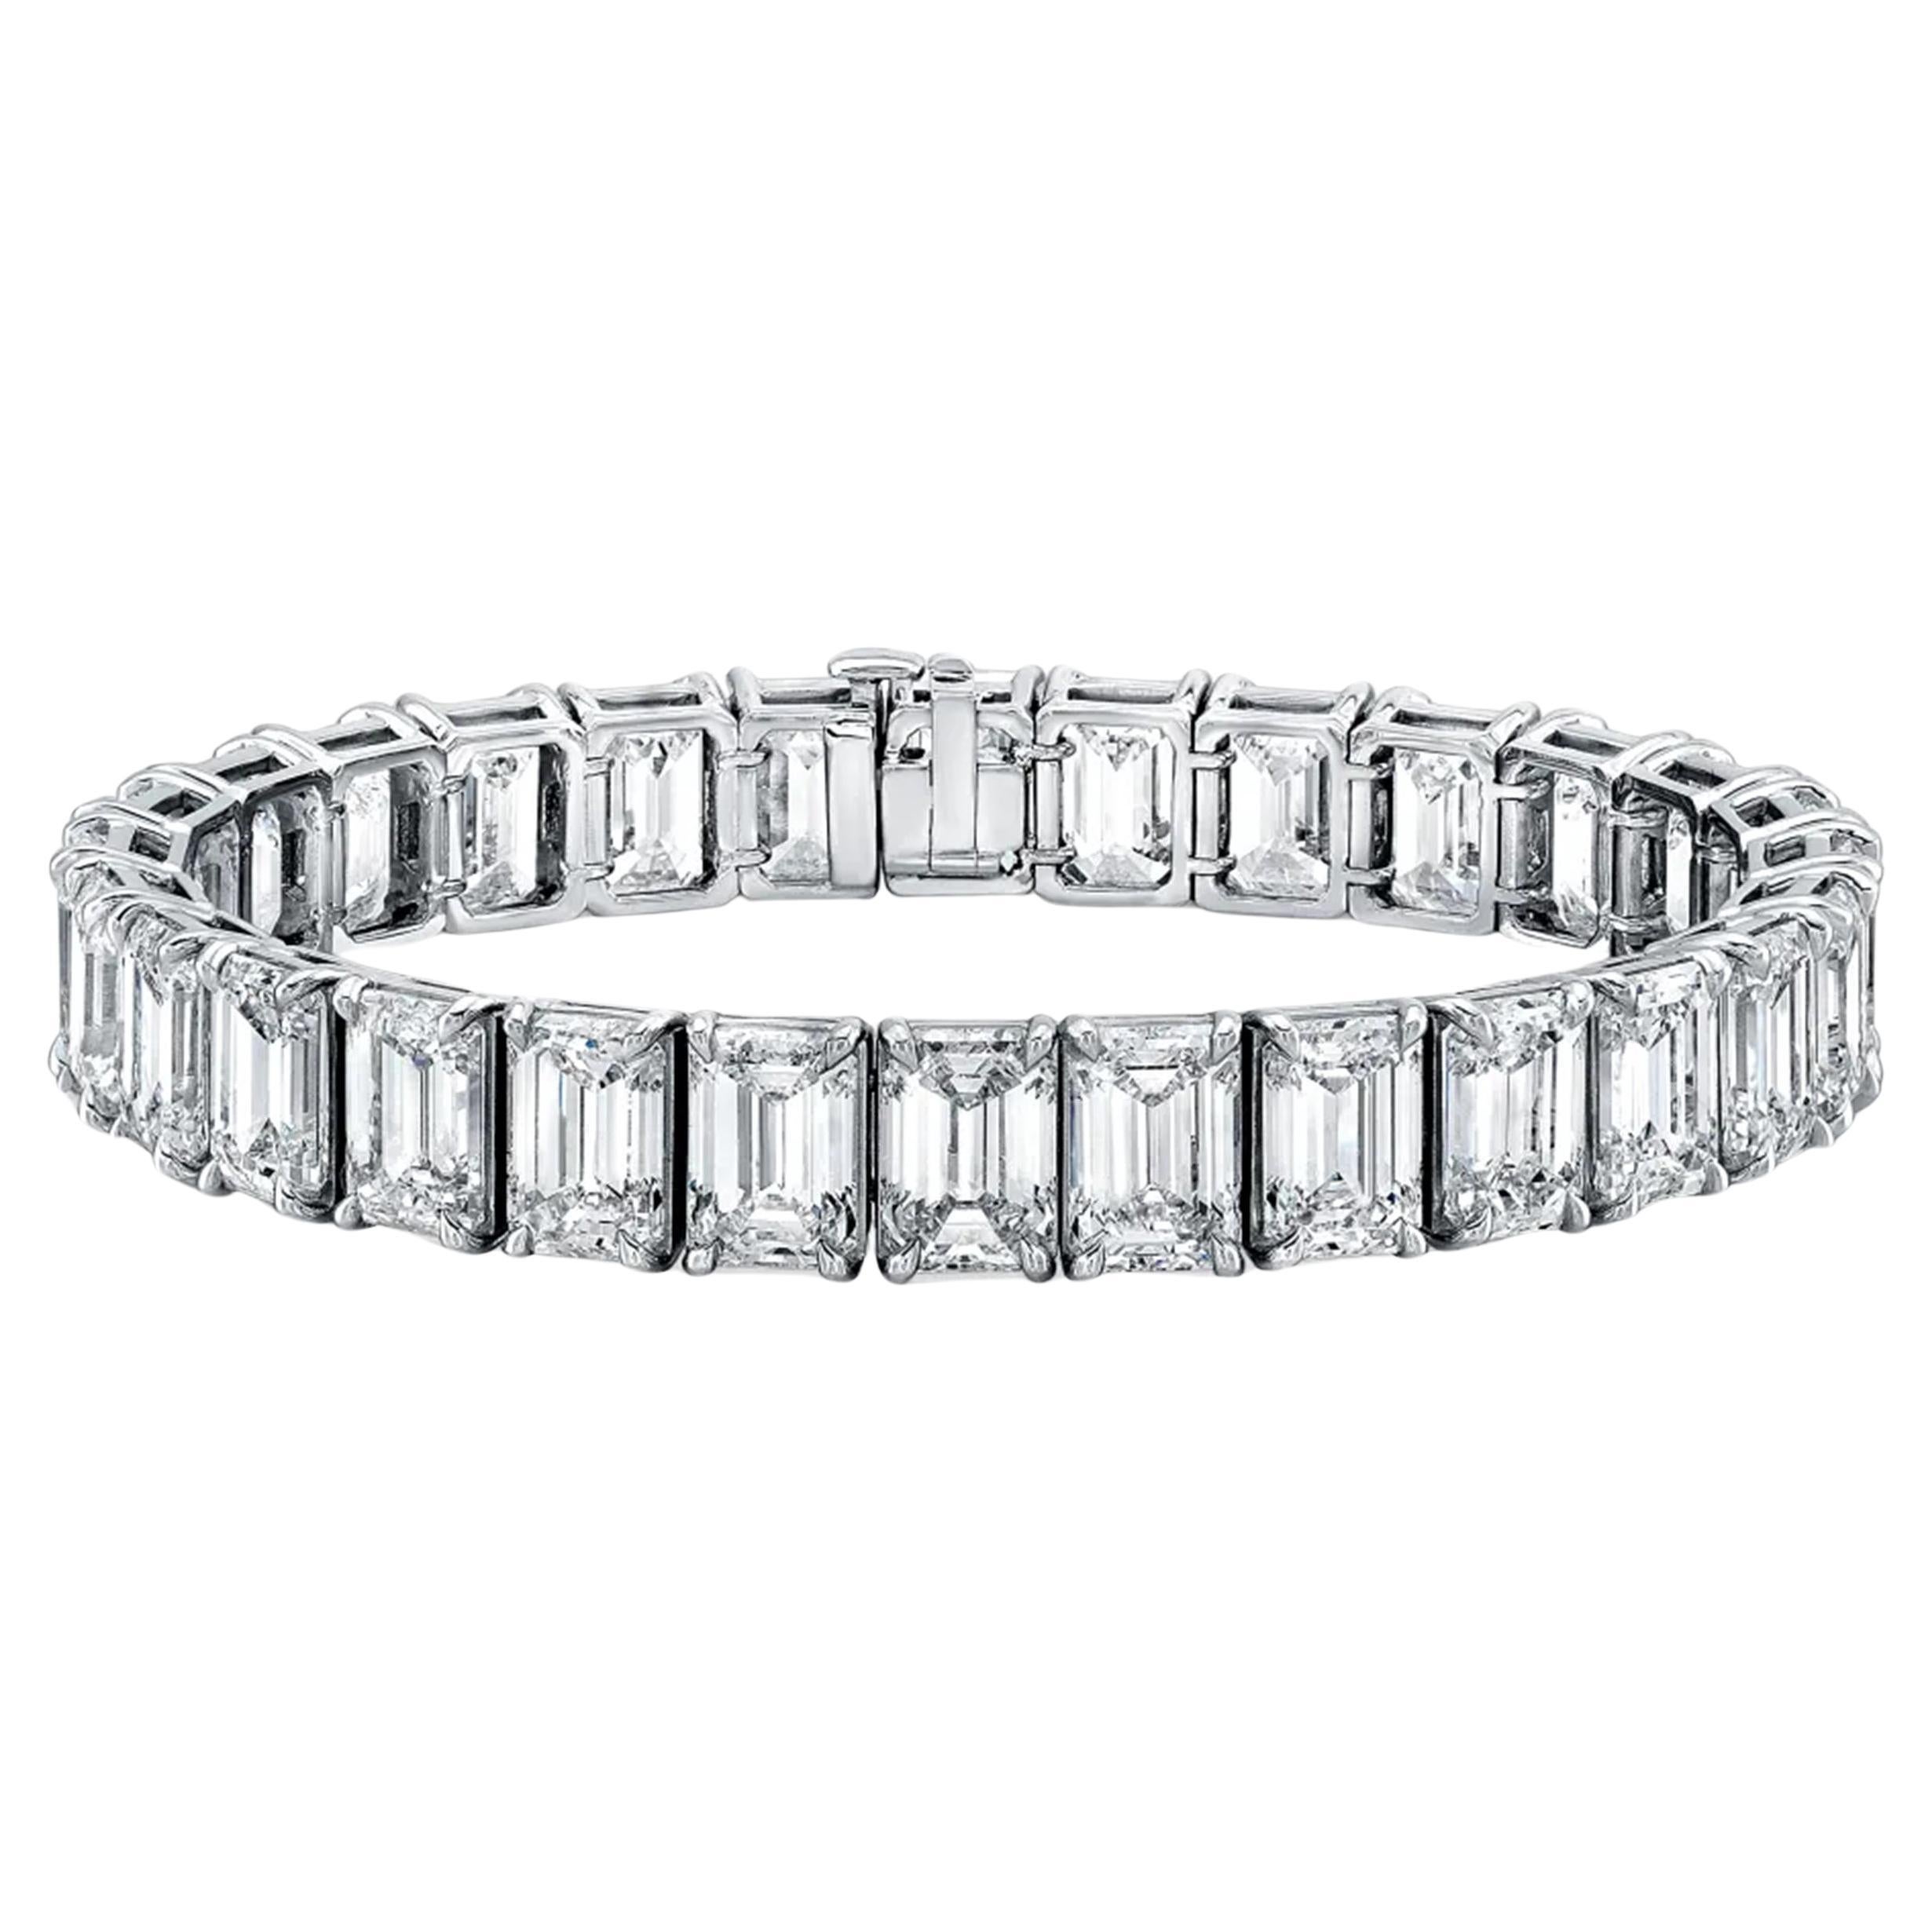 Discover unparalleled sophistication with this majestic bracelet, featuring a flawless assembly of 26 carats of 42 GIA-certified emerald cut diamonds, each boasting exceptional F color grades and clarity ranging from VS2. Every gemstone in this